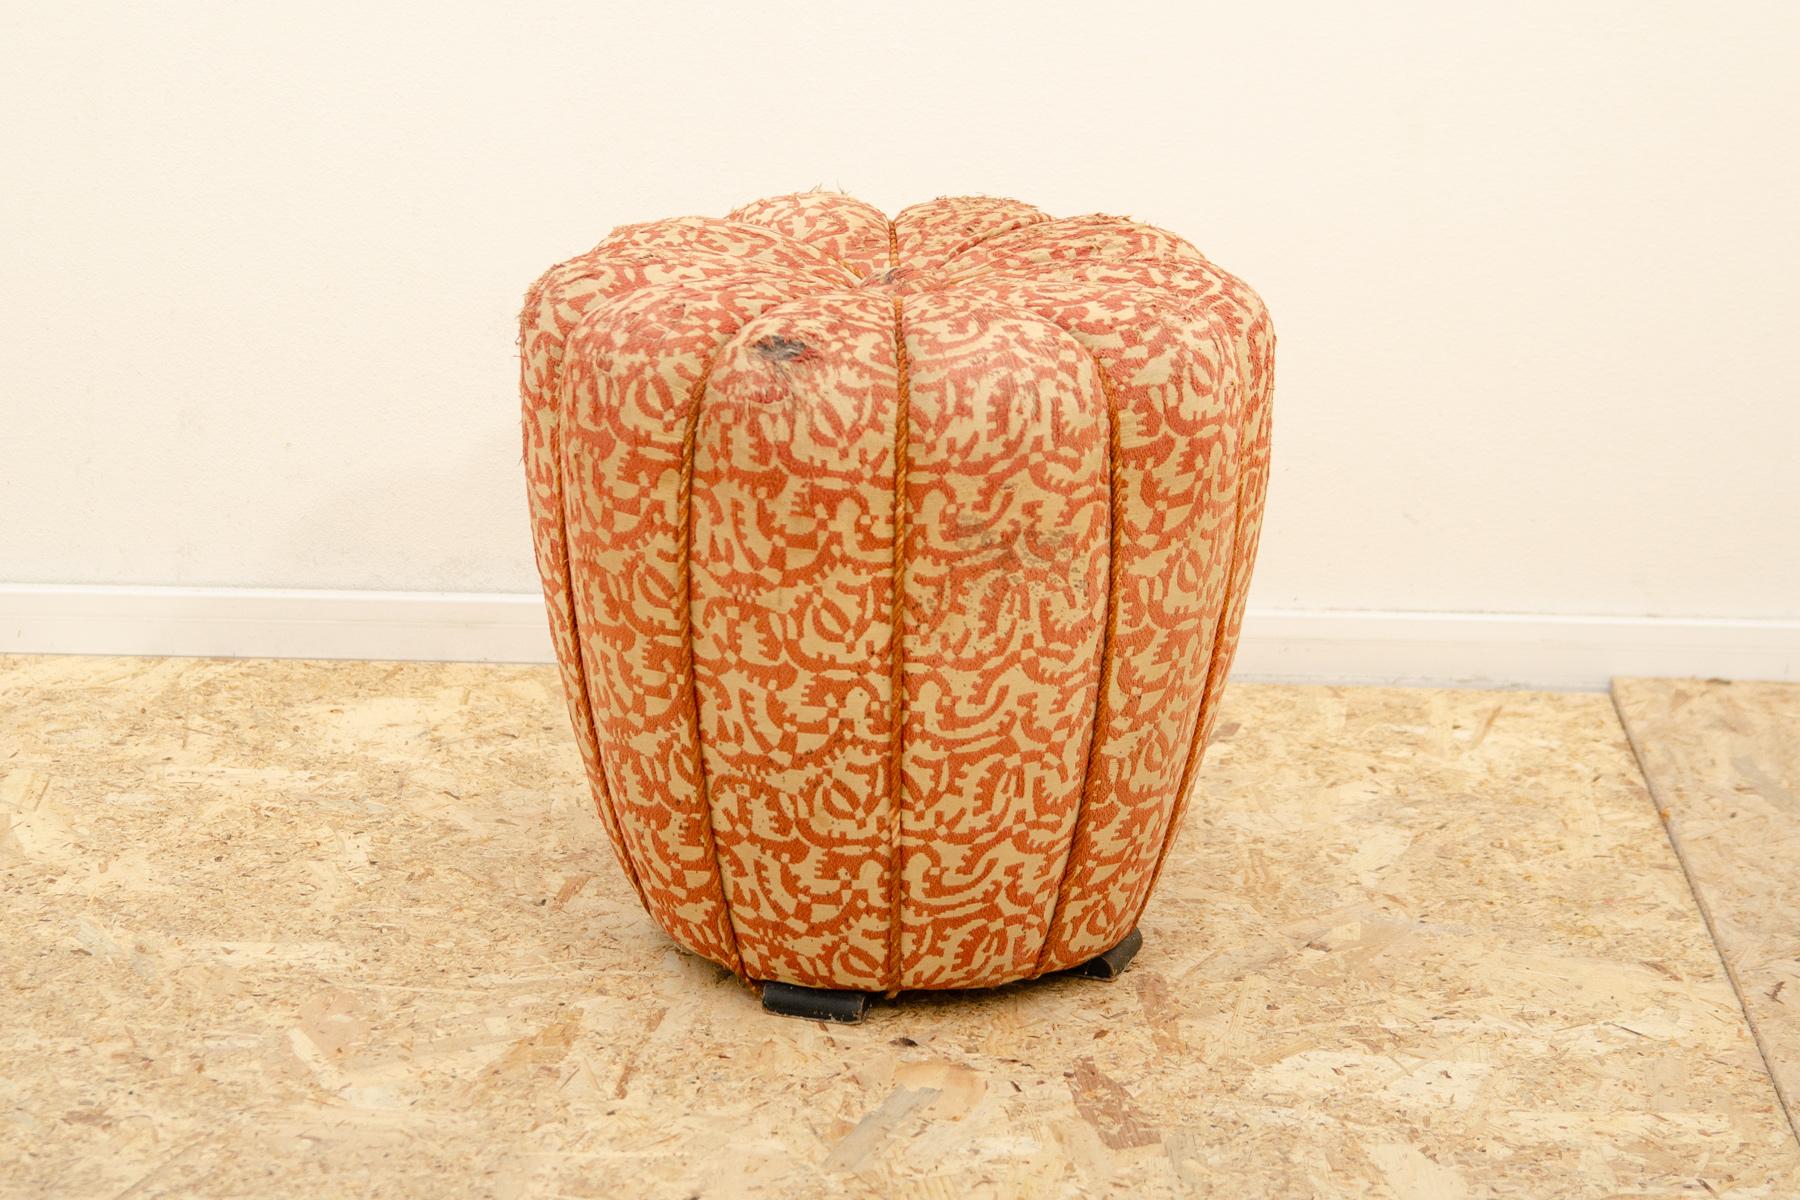 This mid-century pouffe (footstool) was designed by Jindrich Halabala and made by UP Závody in the 1950s. Cool retro chic. The upholstery showing signs of age and using (has a few scuffs in a few places on the seat. Overall is in good preserved